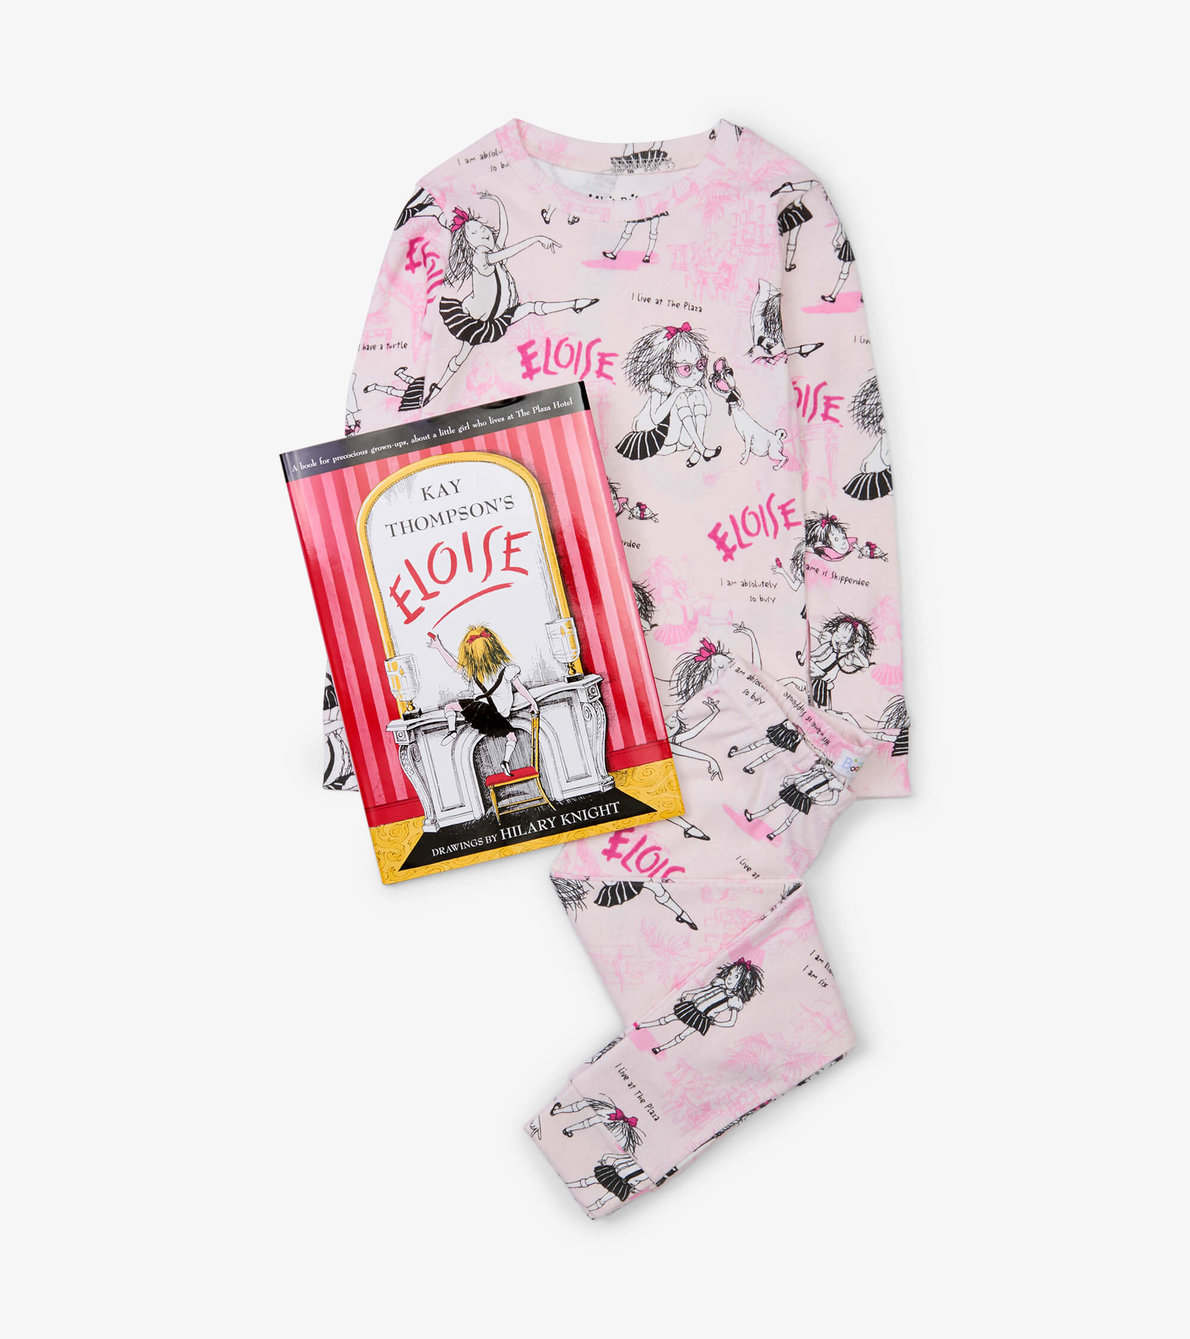 View larger image of Eloise Book and Pajama Set